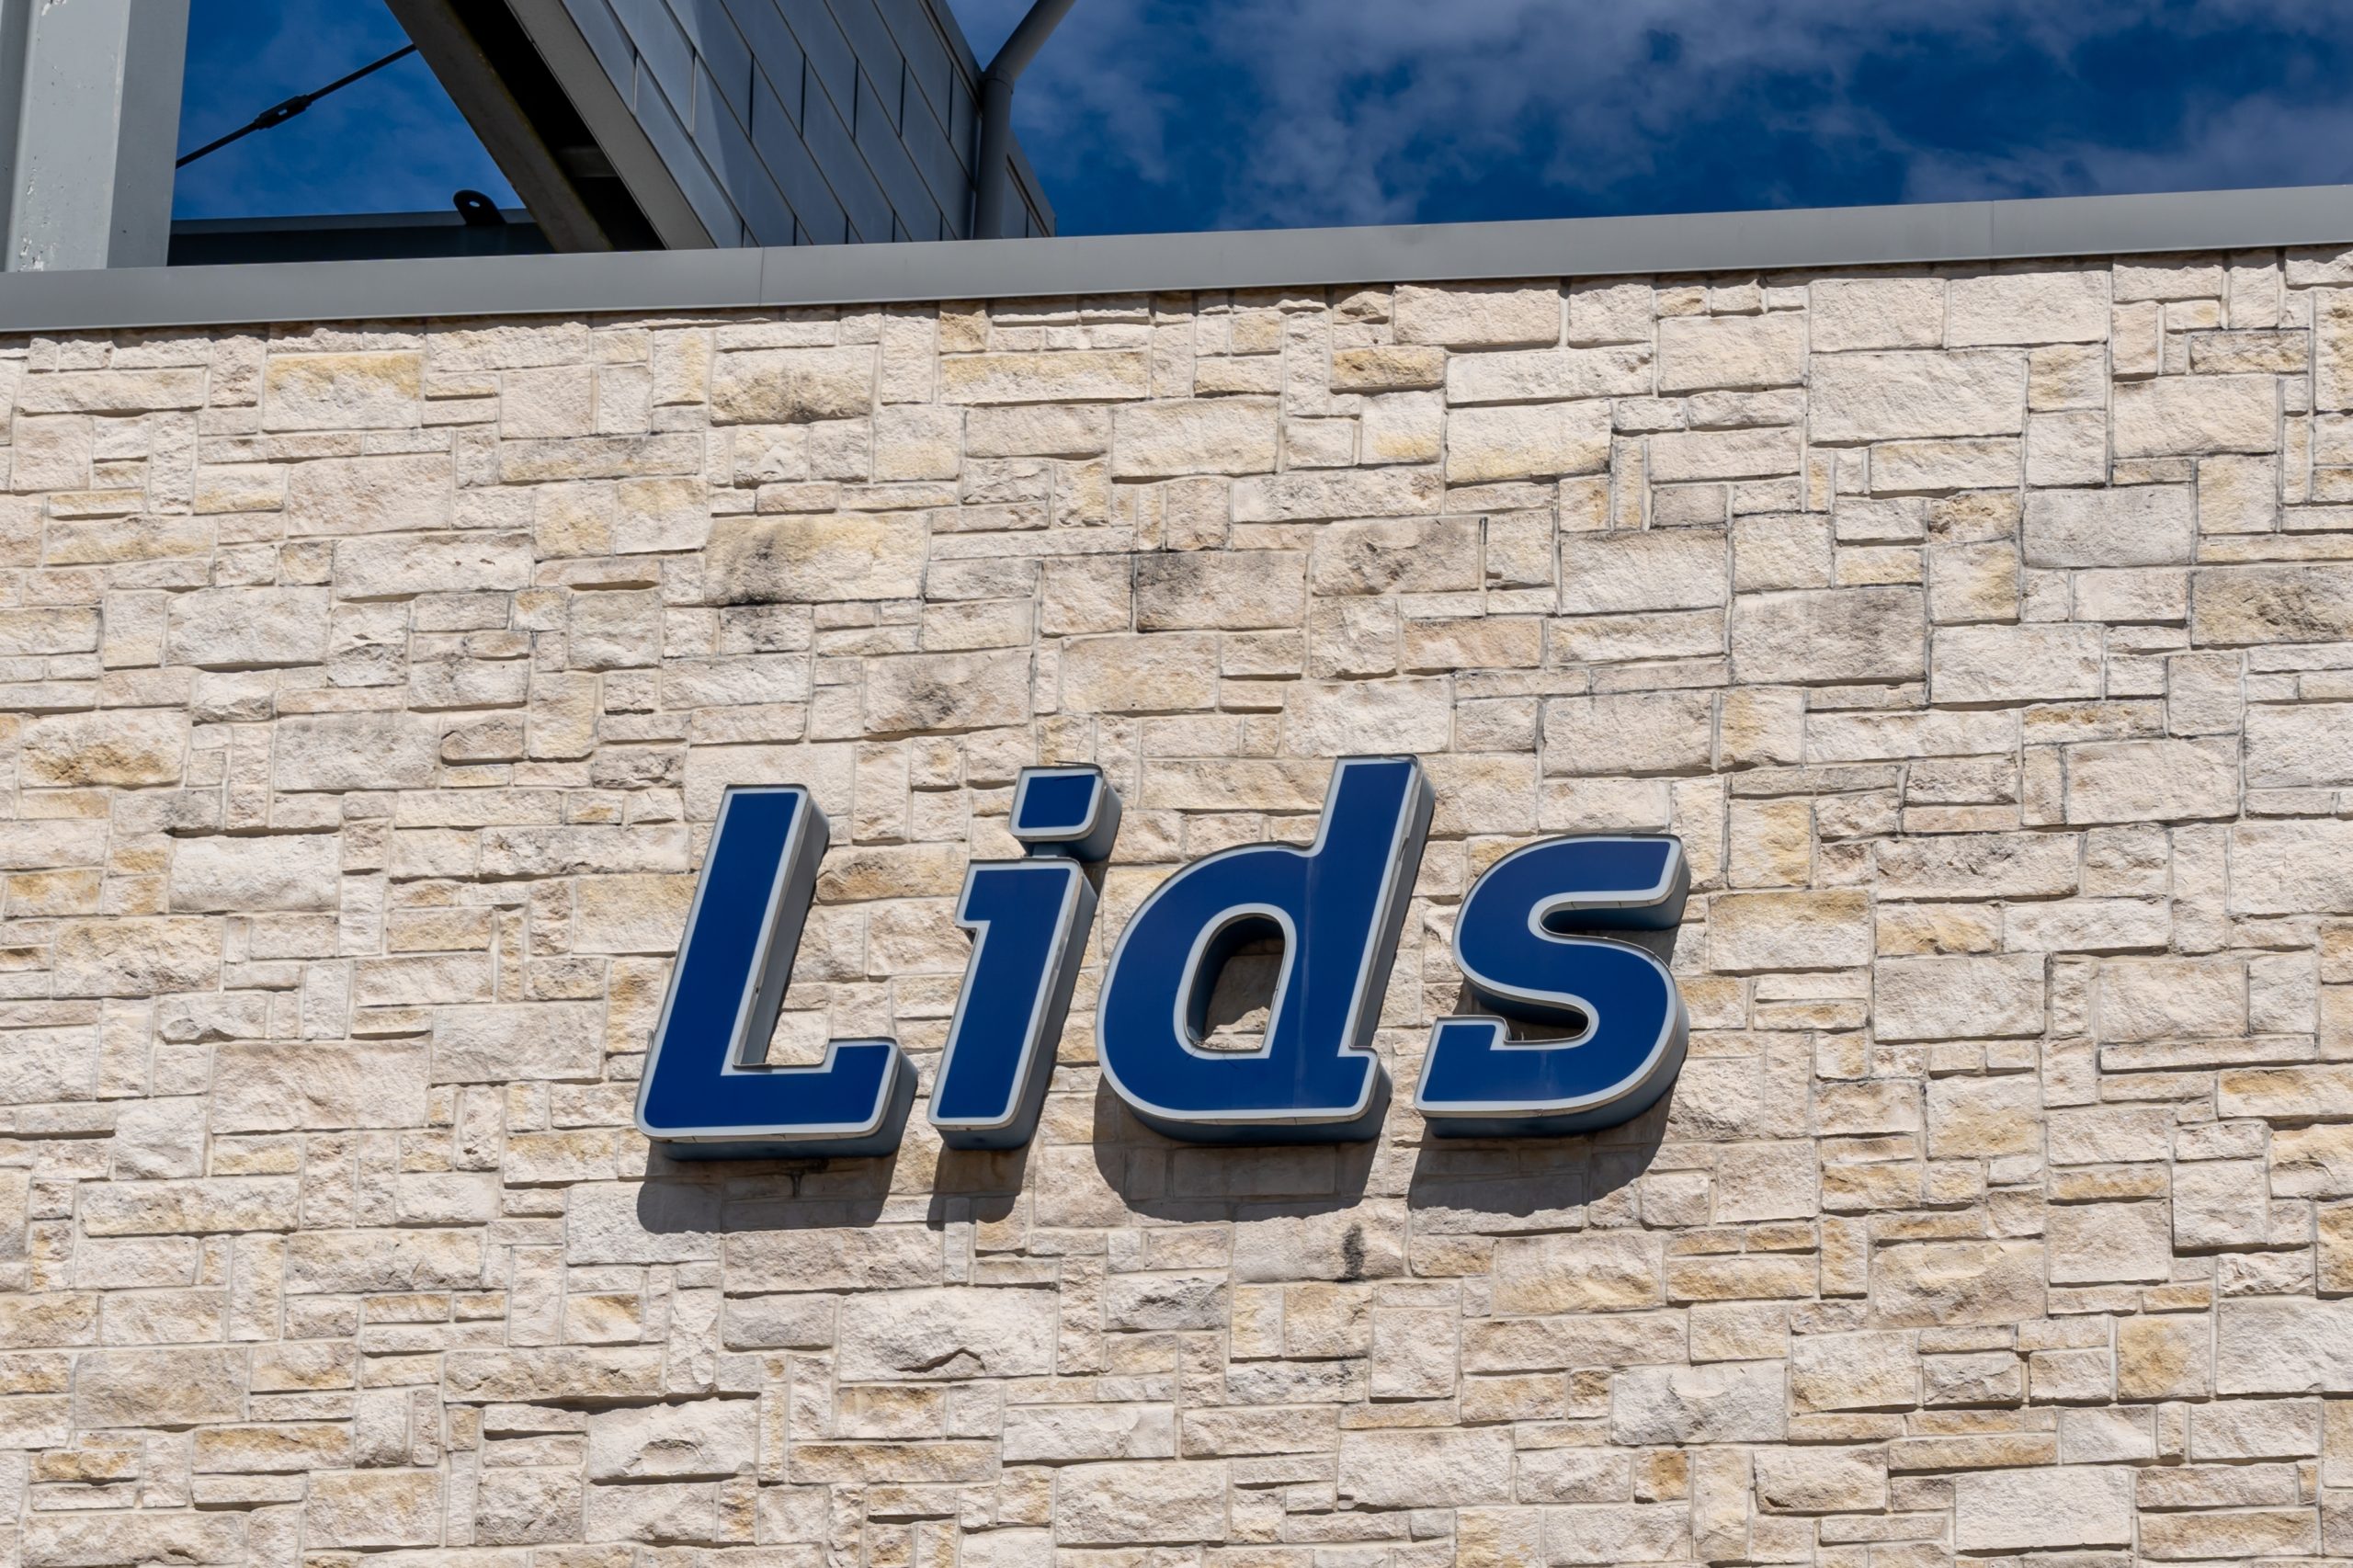 French Soccer Club Opens Las Vegas Store, Operated by Lids